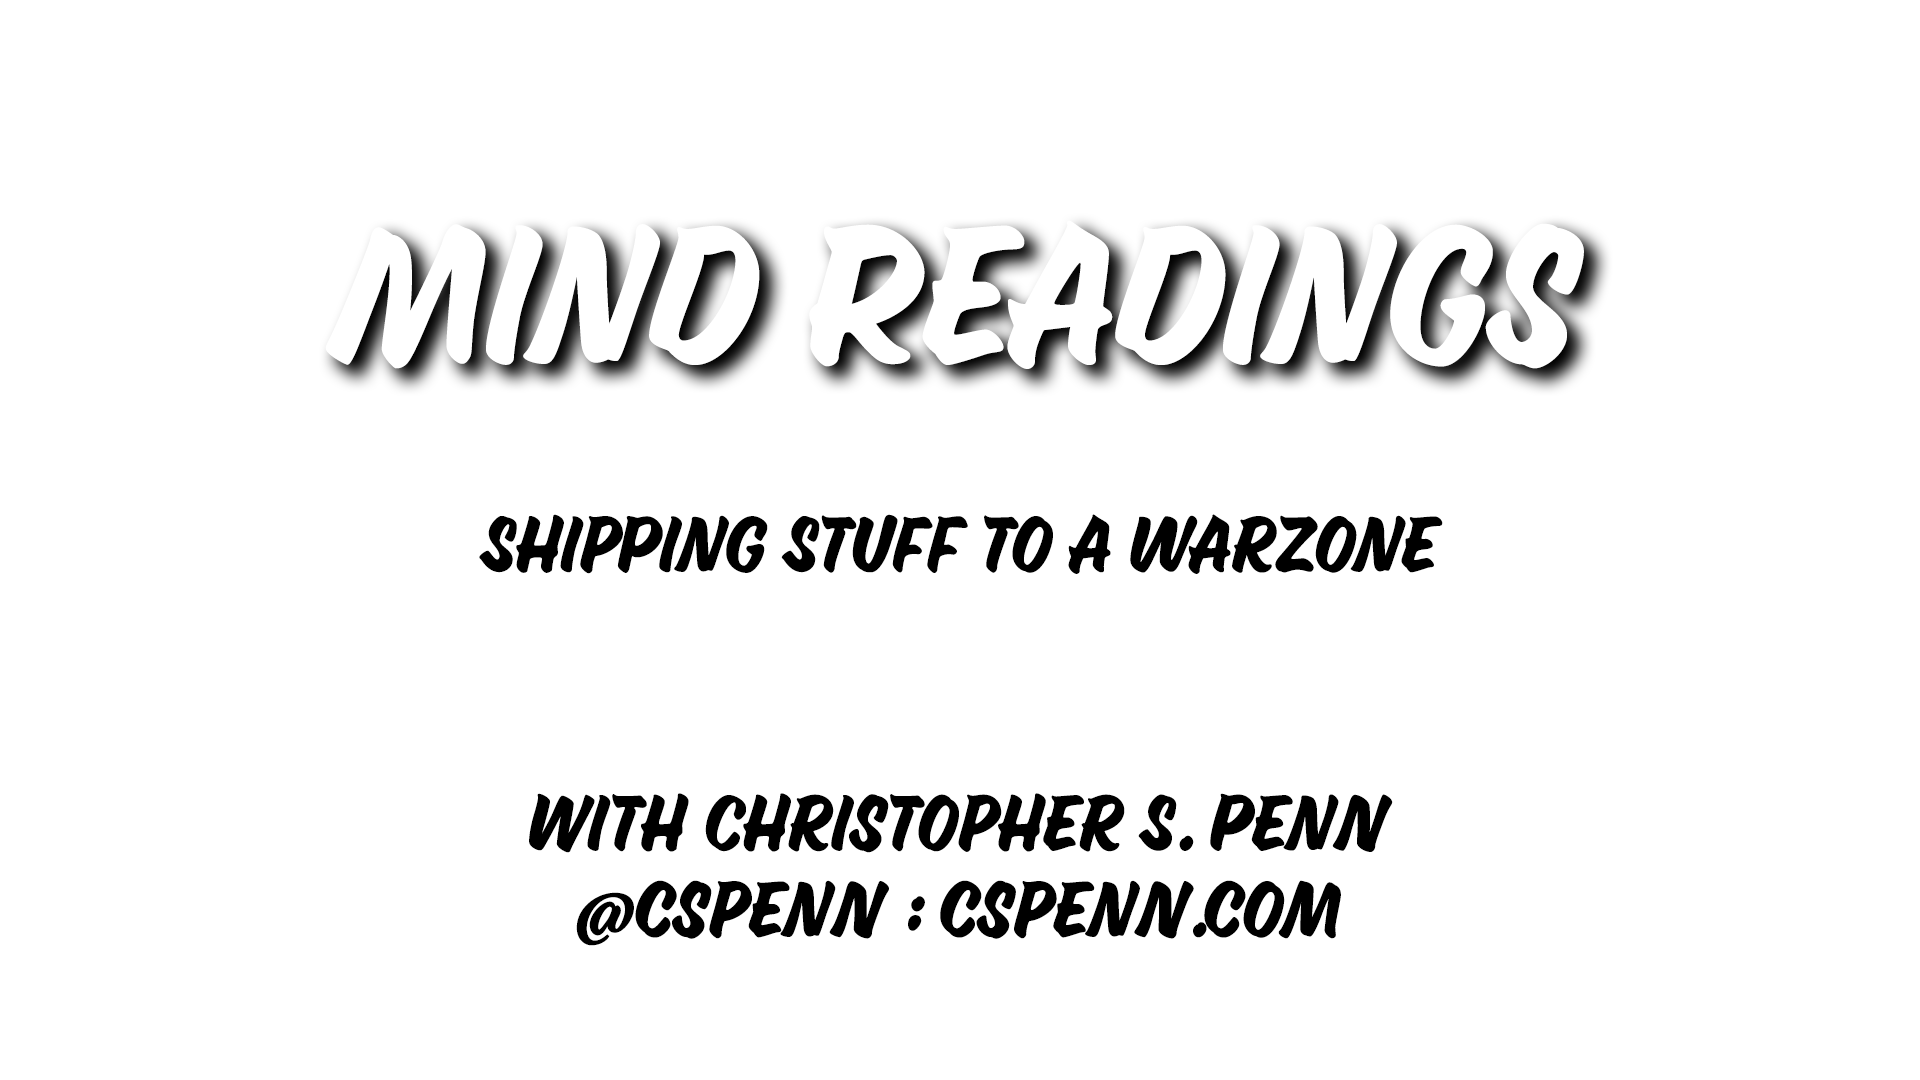 Mind Readings: Shipping Stuff to a Warzone